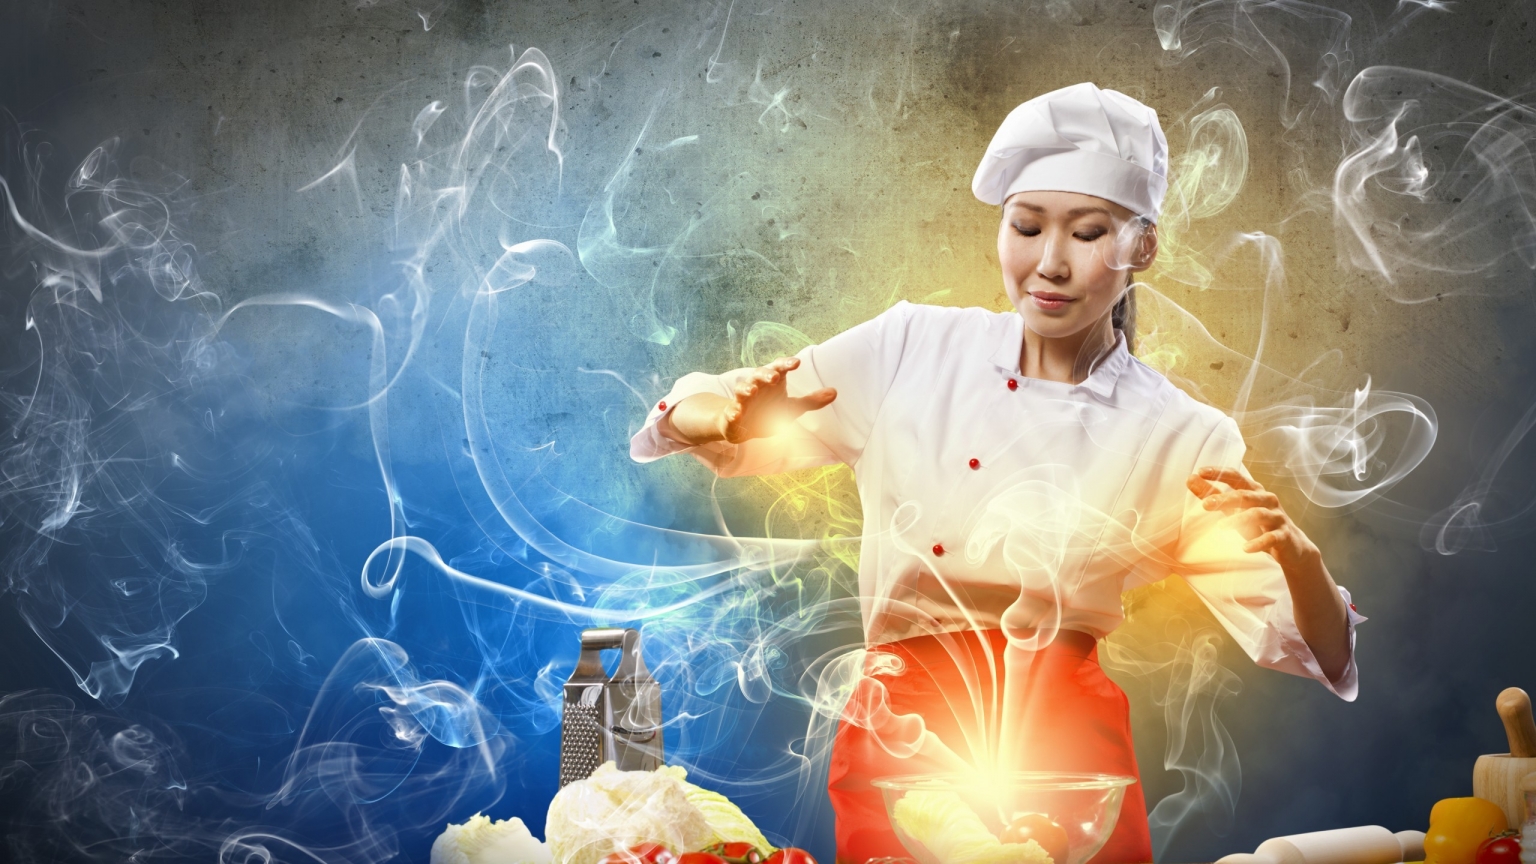 Creative Asian Chef for 1536 x 864 HDTV resolution